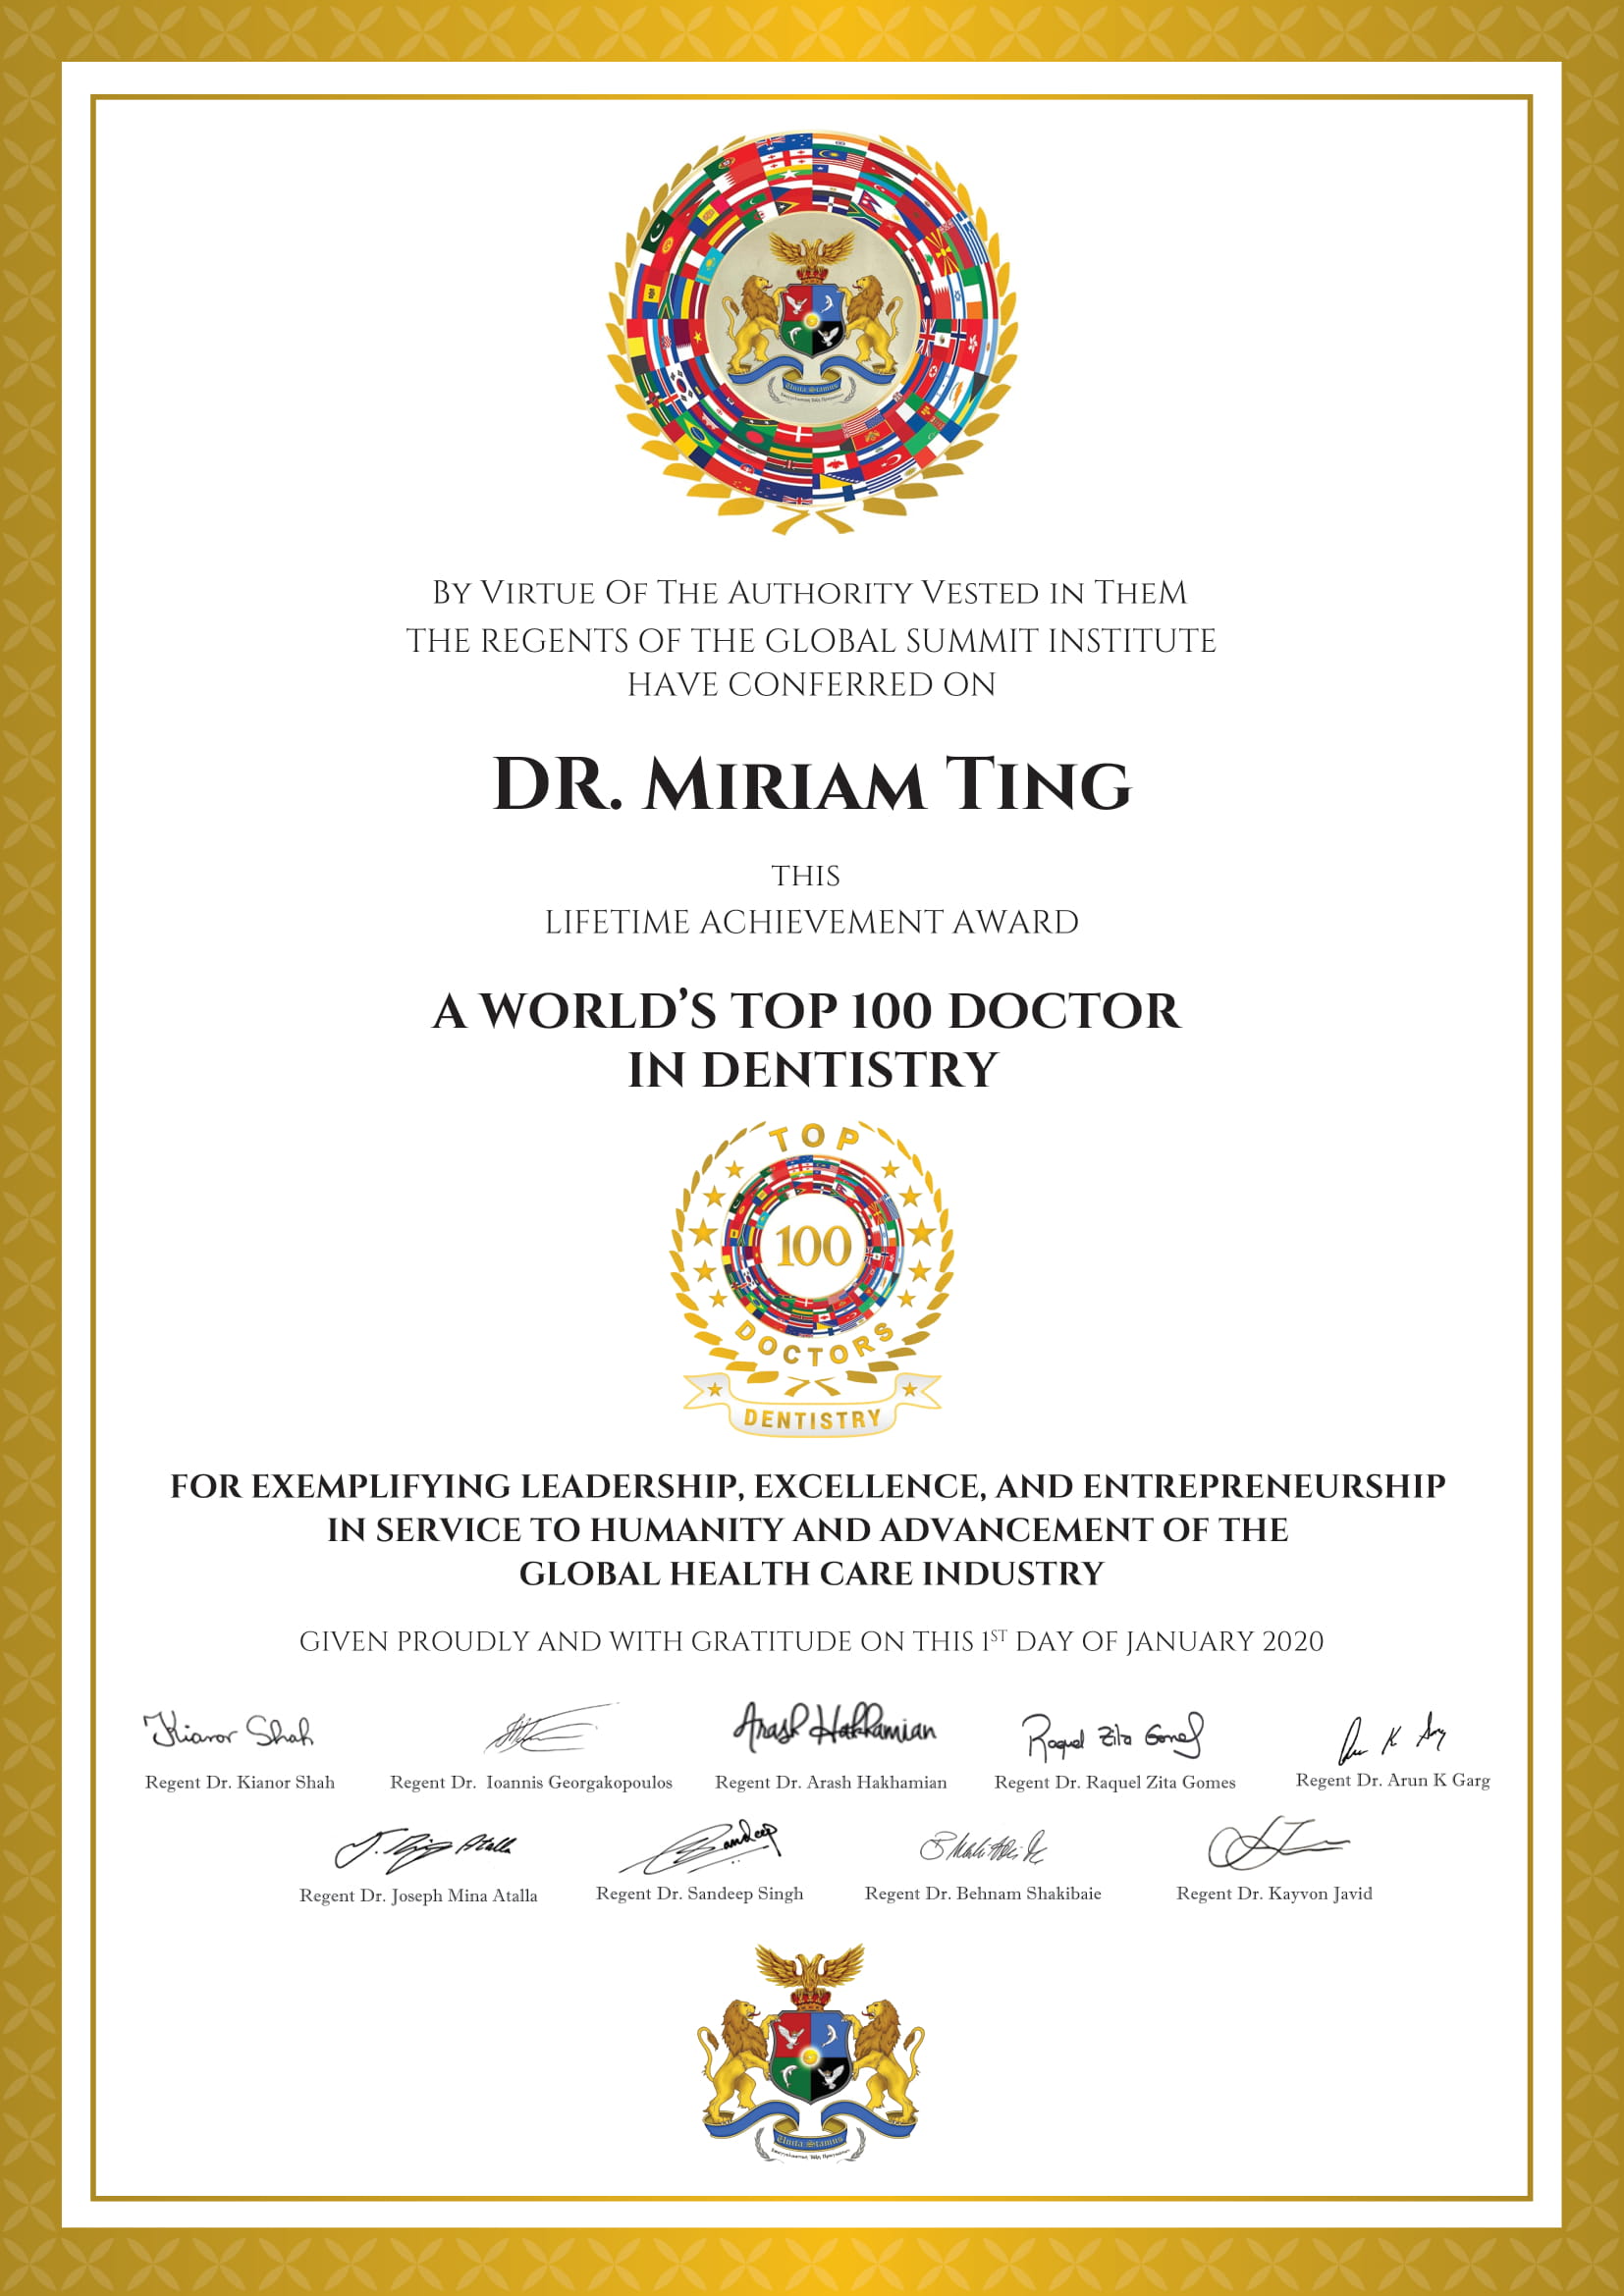 A World's Top 100 Doctor in Dentistry